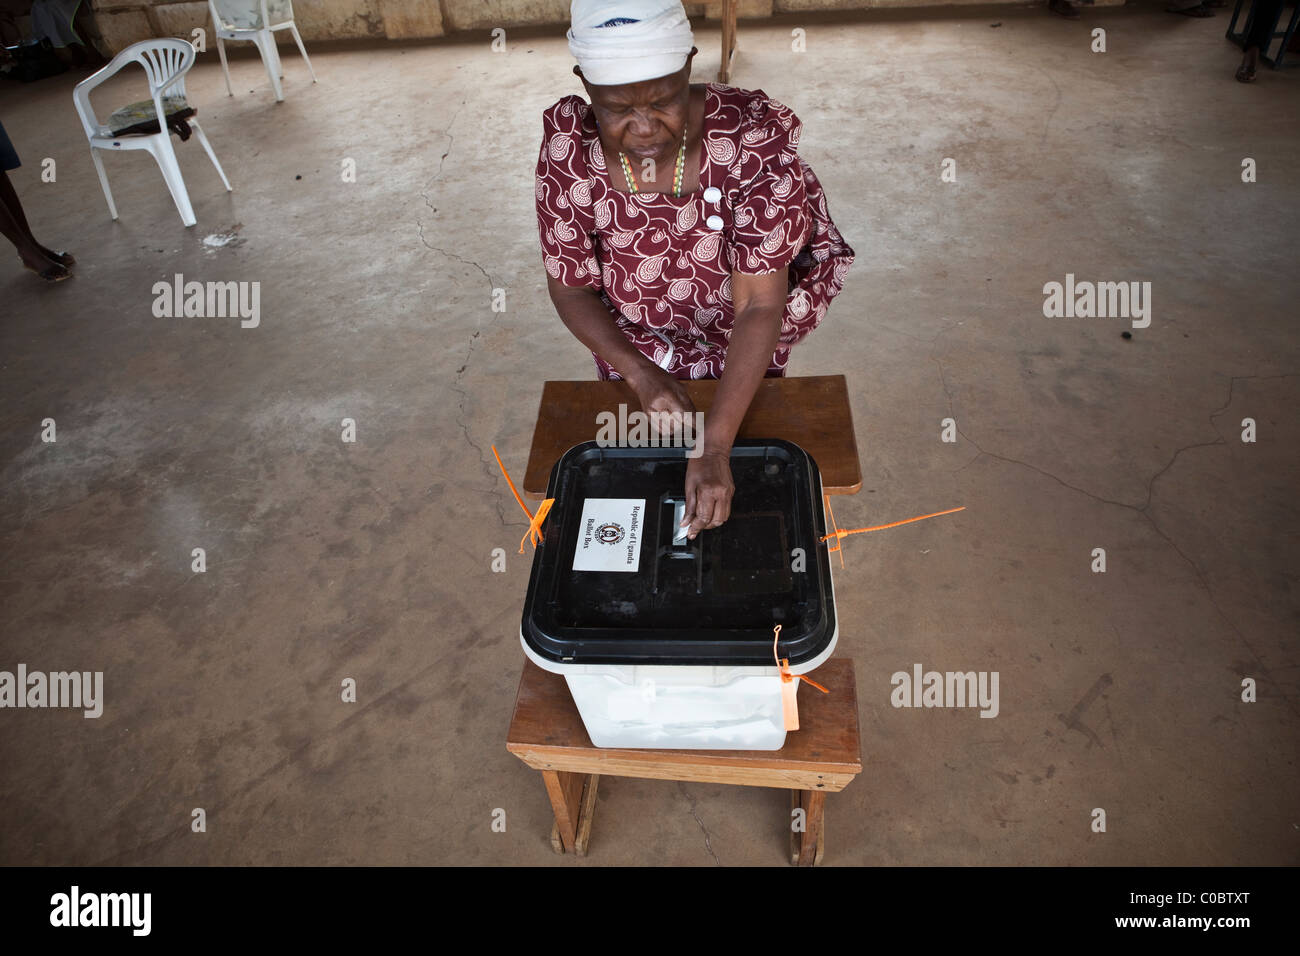 A woman casts her ballot at a polling station in Kumi, Uganda to cast her vote in the 2011 presidential election. Stock Photo